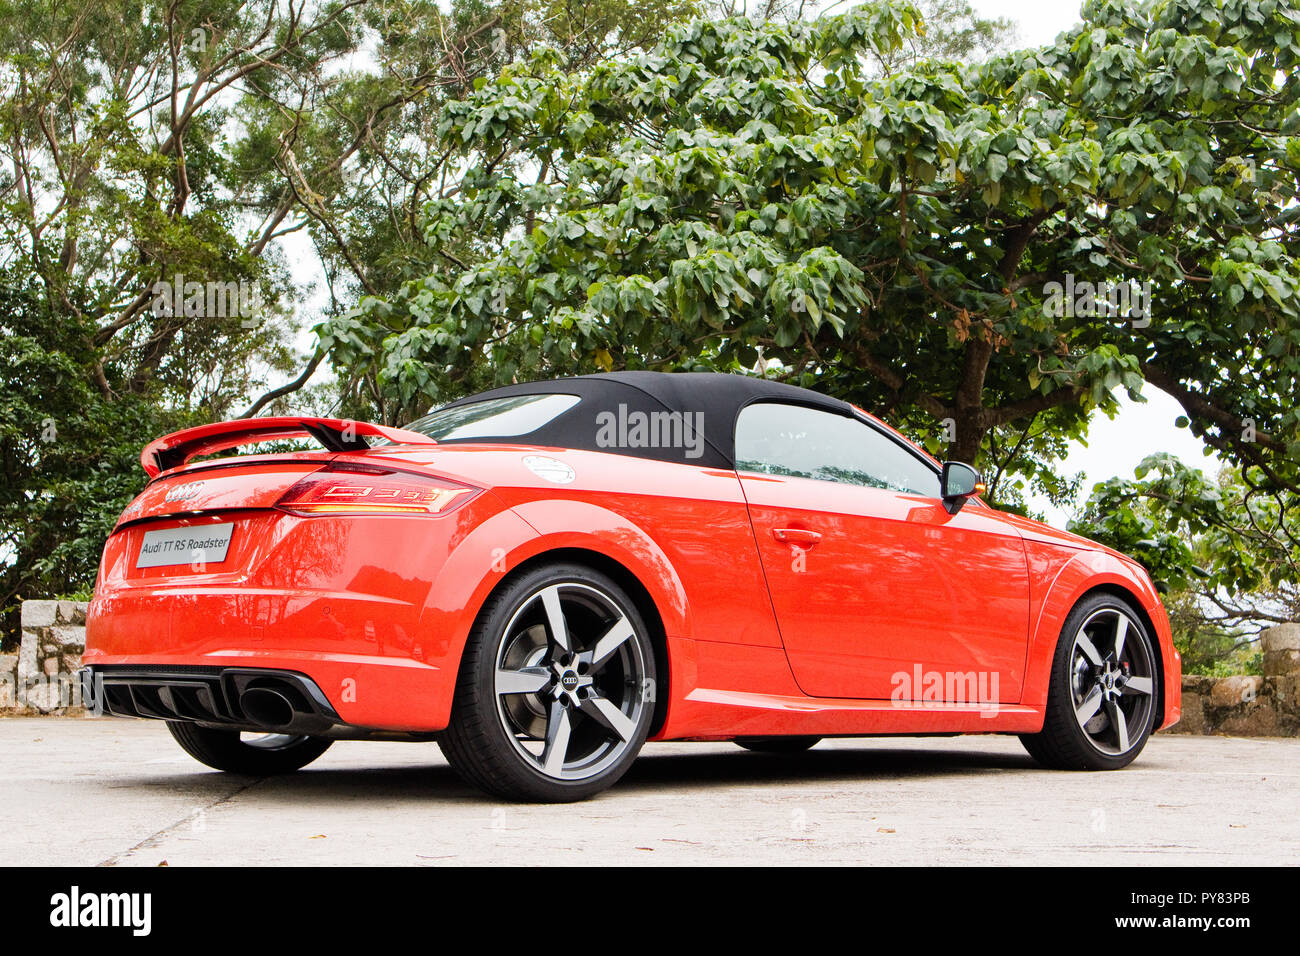 Audi Tt Sportback High Resolution Stock Photography And Images Alamy